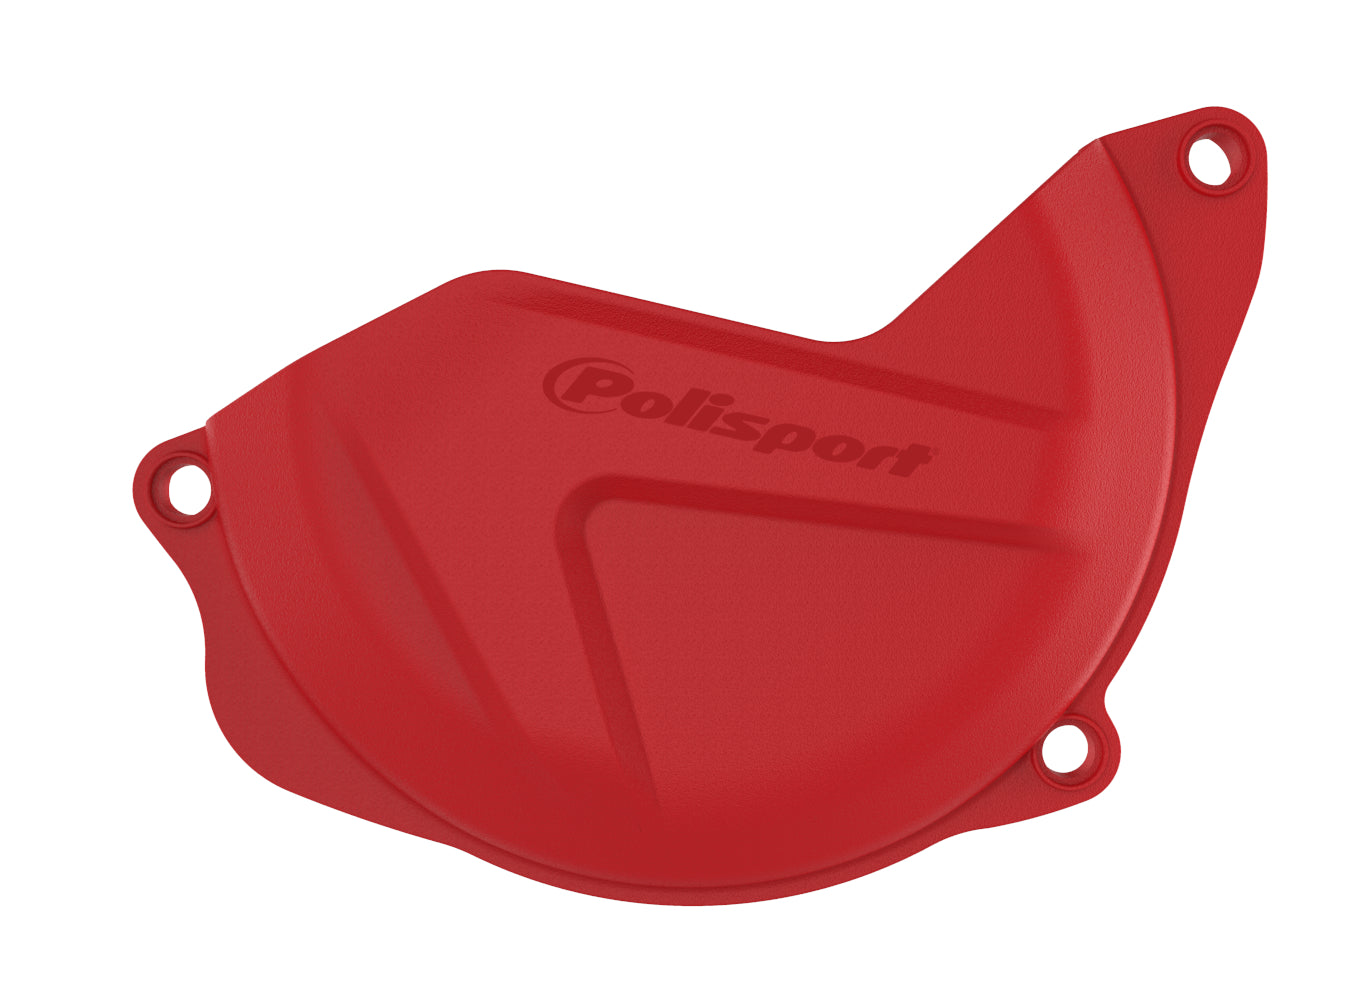 Polisport Clutch Cover Protector HONDA CRF450R 10-16 Red